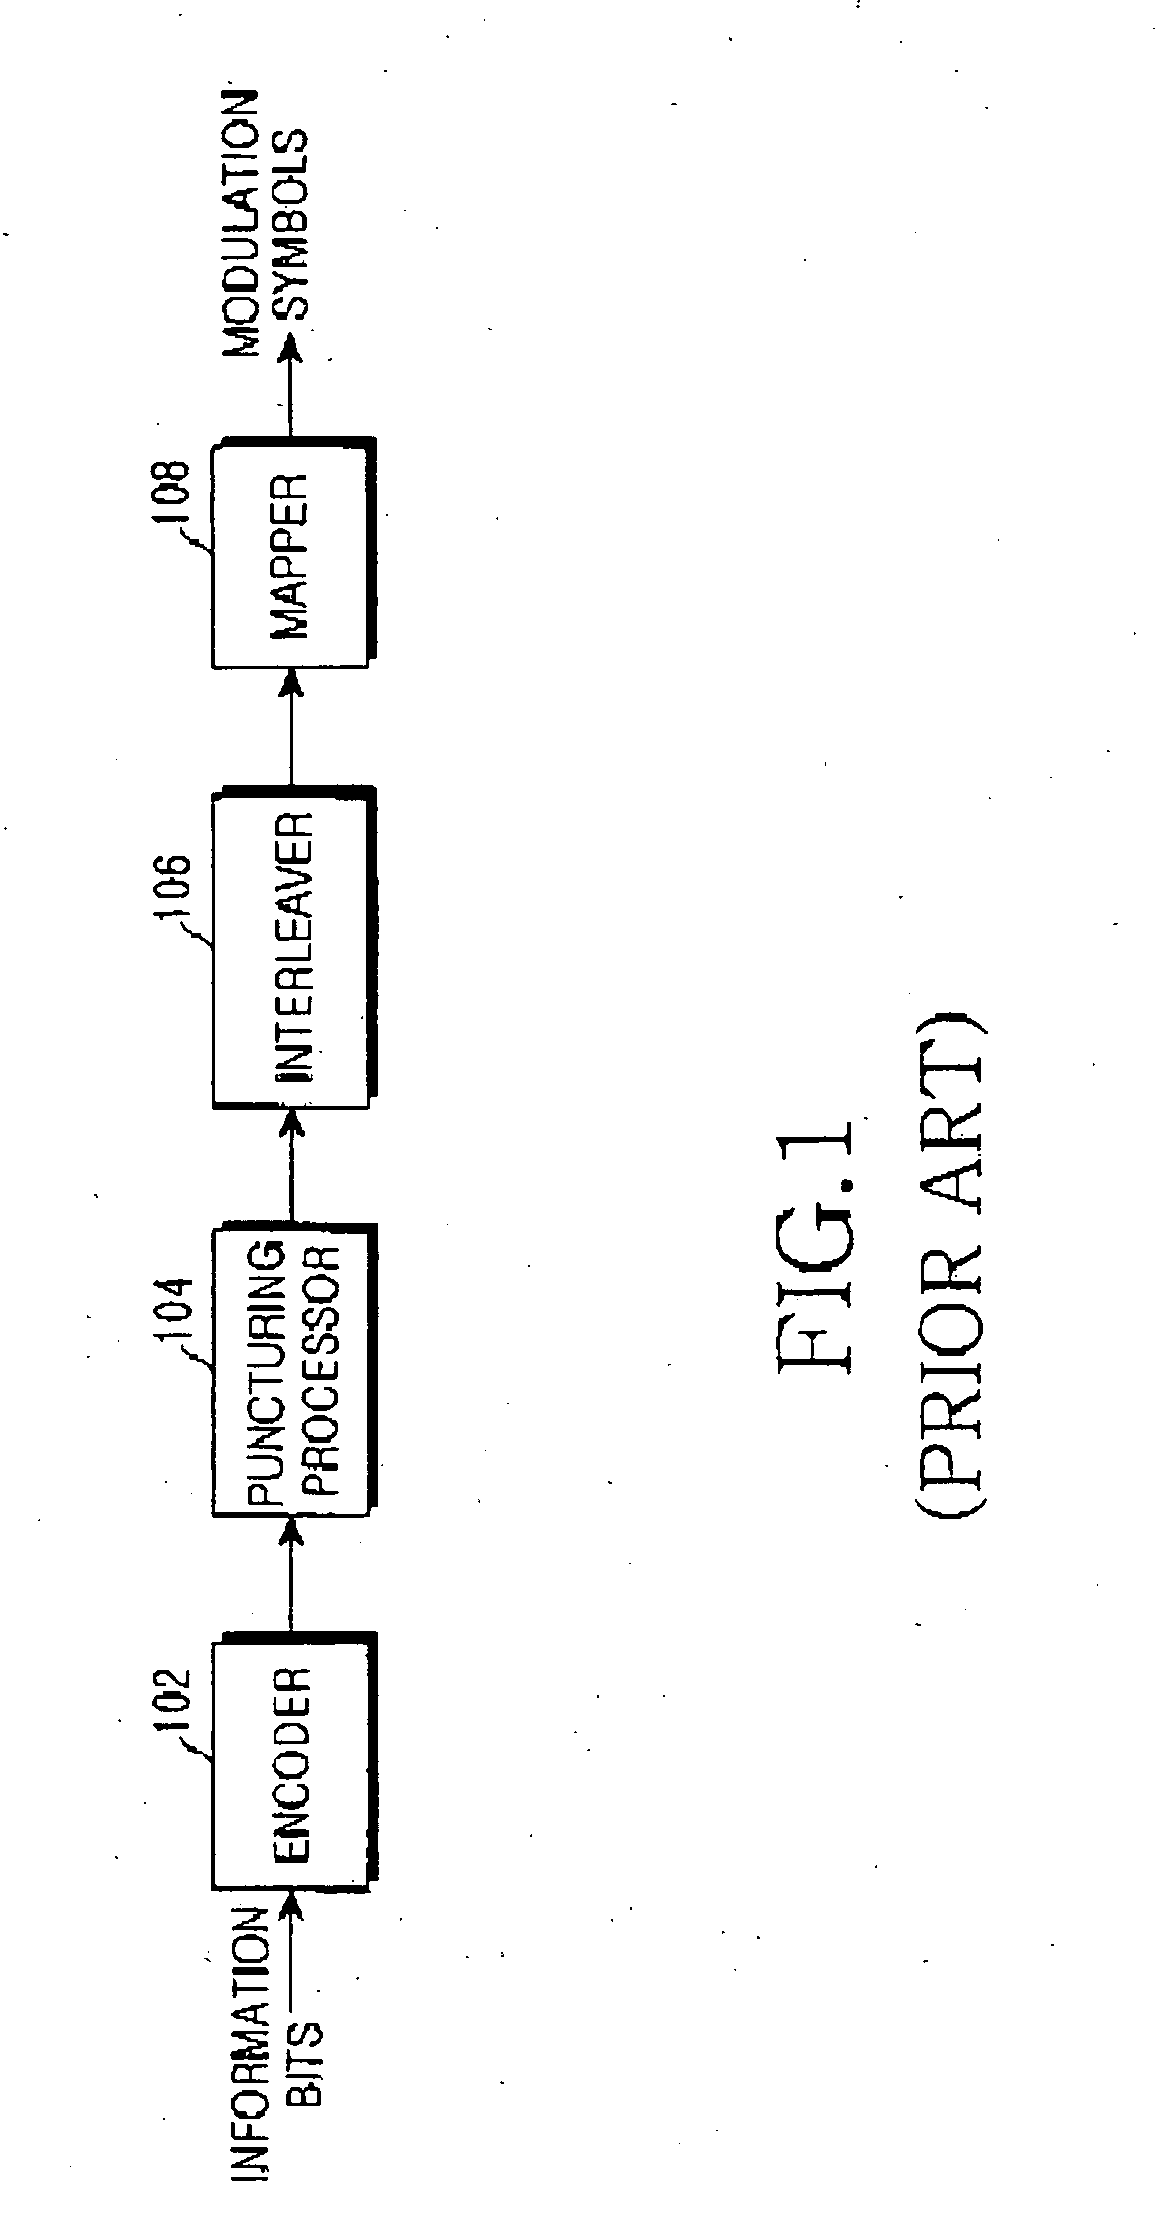 Apparatus and method for data transmission by constellation combination in a communication system